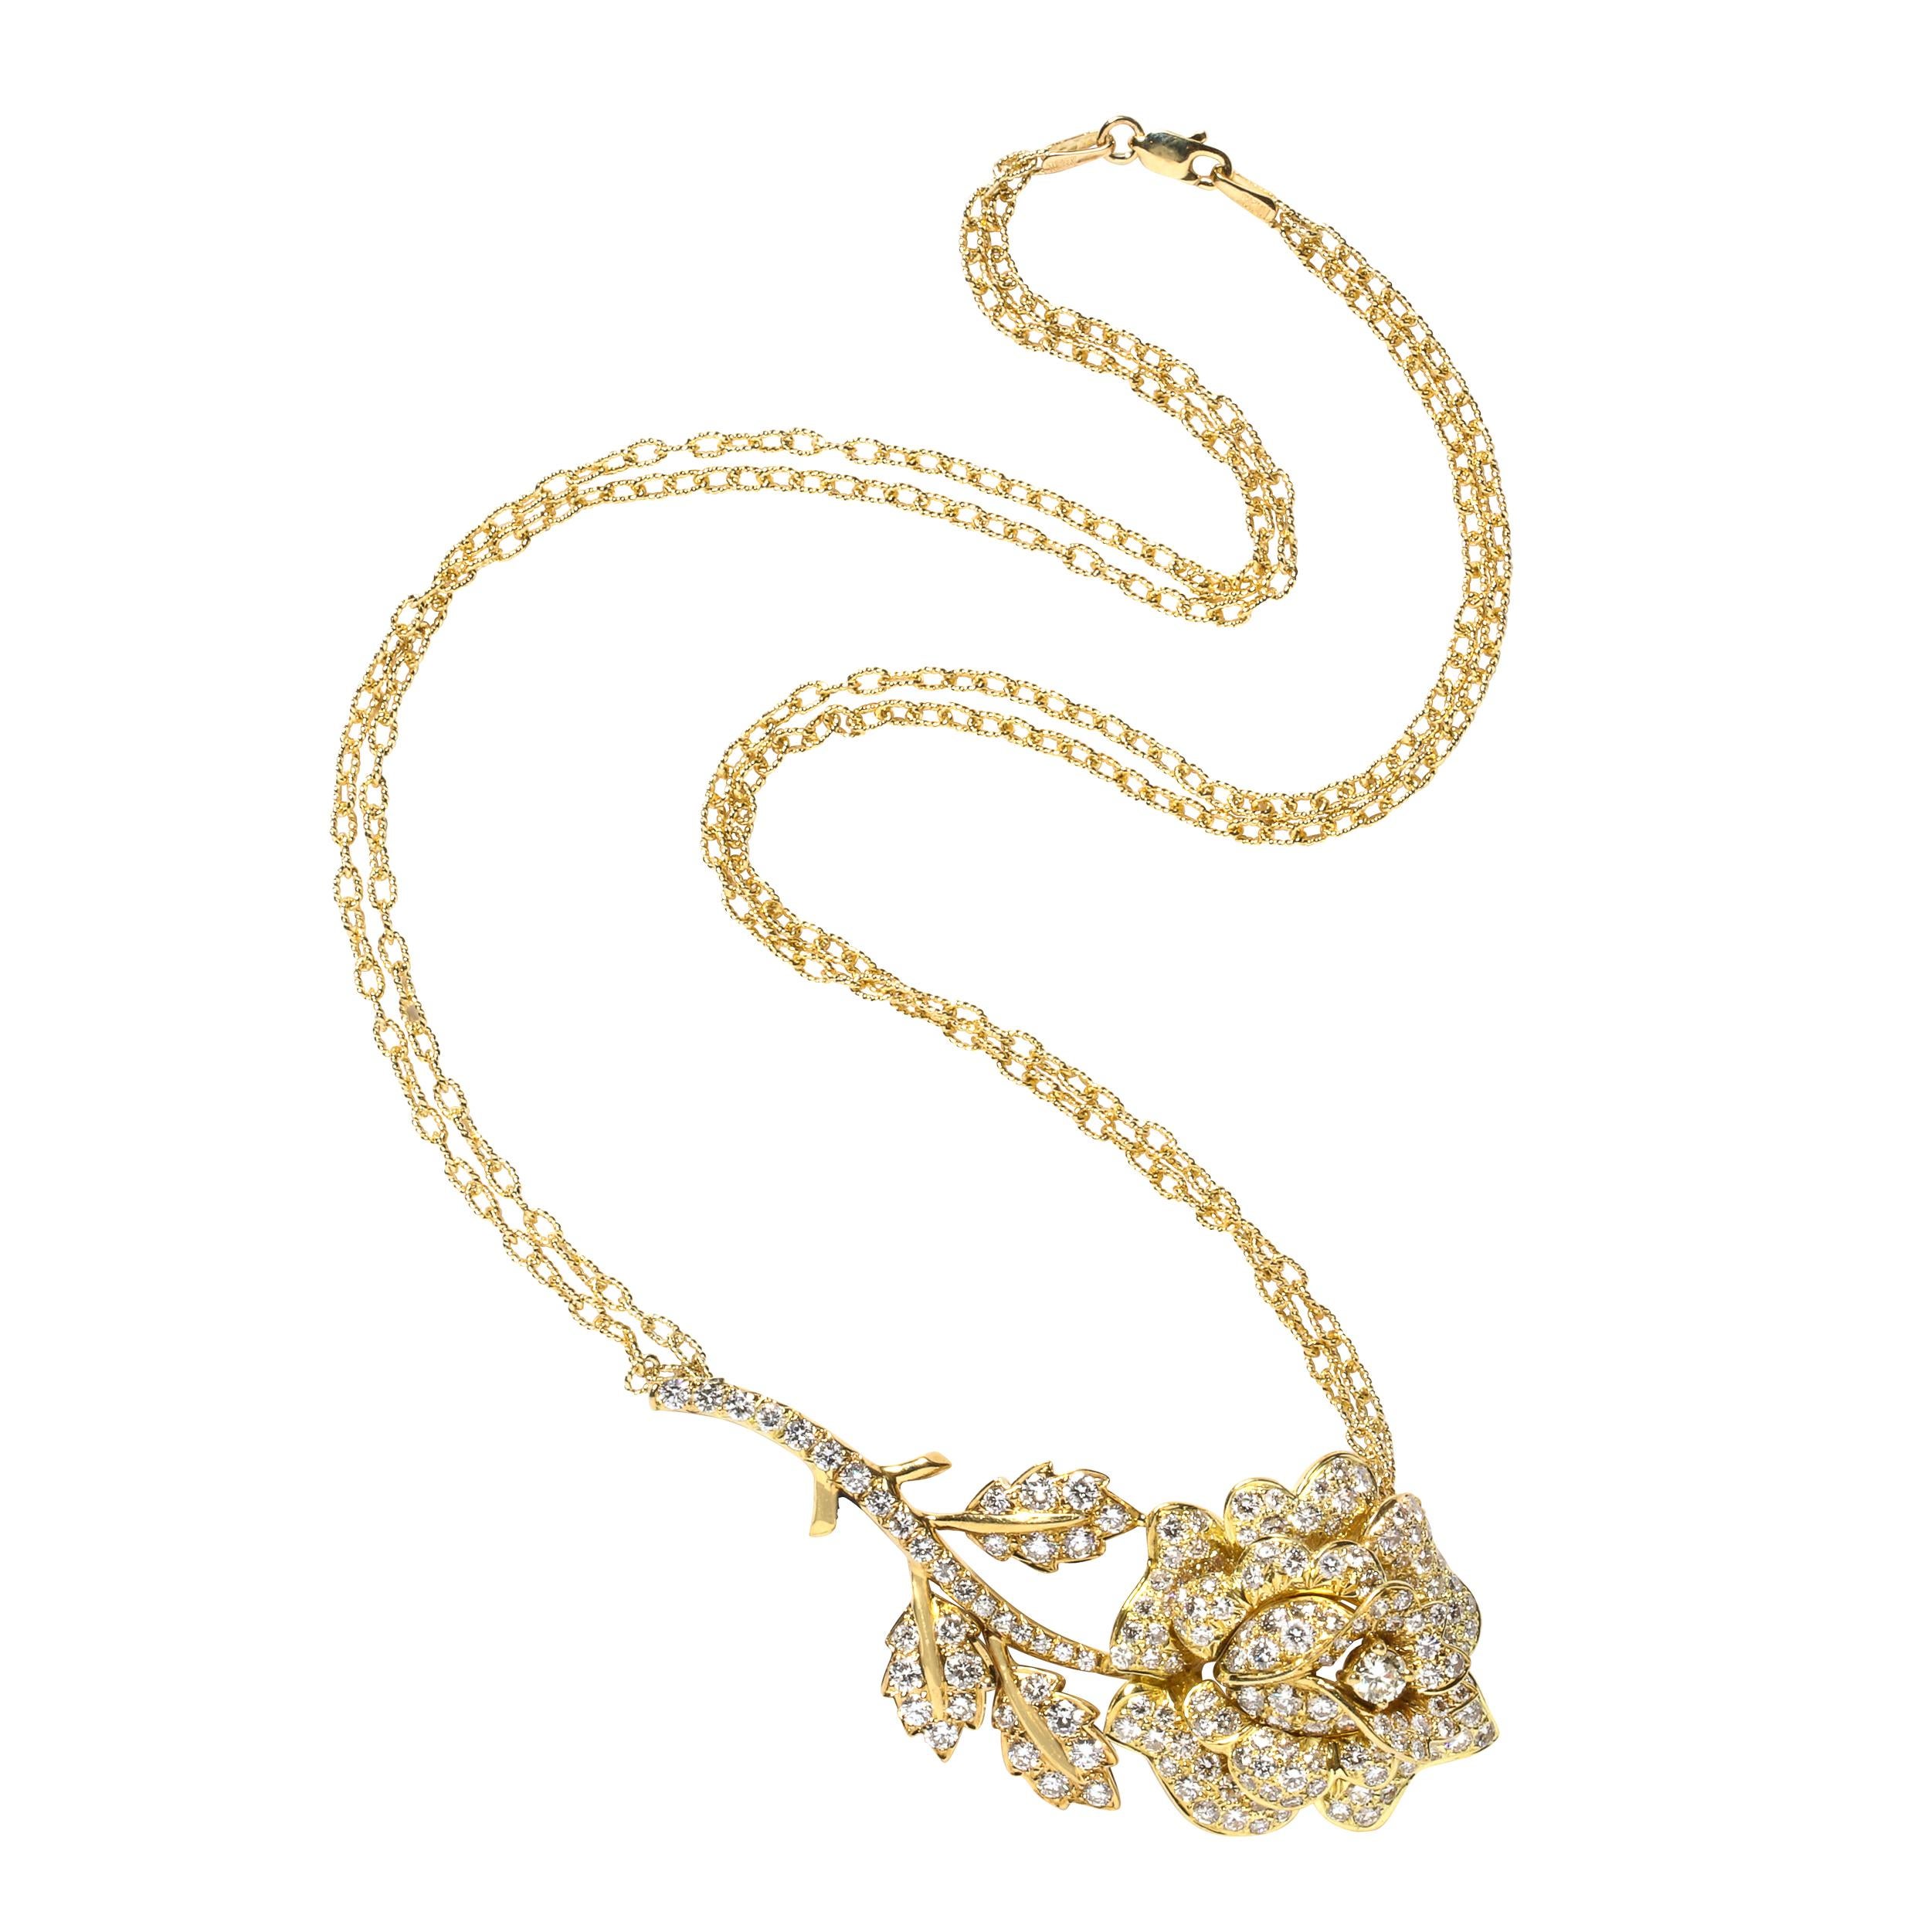 This stunning modernist necklace was realized in Italy during the latter half of the 20th century. It offers a stylized rose complete with a blooming flower, bifurcated leaves and thorns in 18kt yellow gold and diamonds. The pendant is flooded with